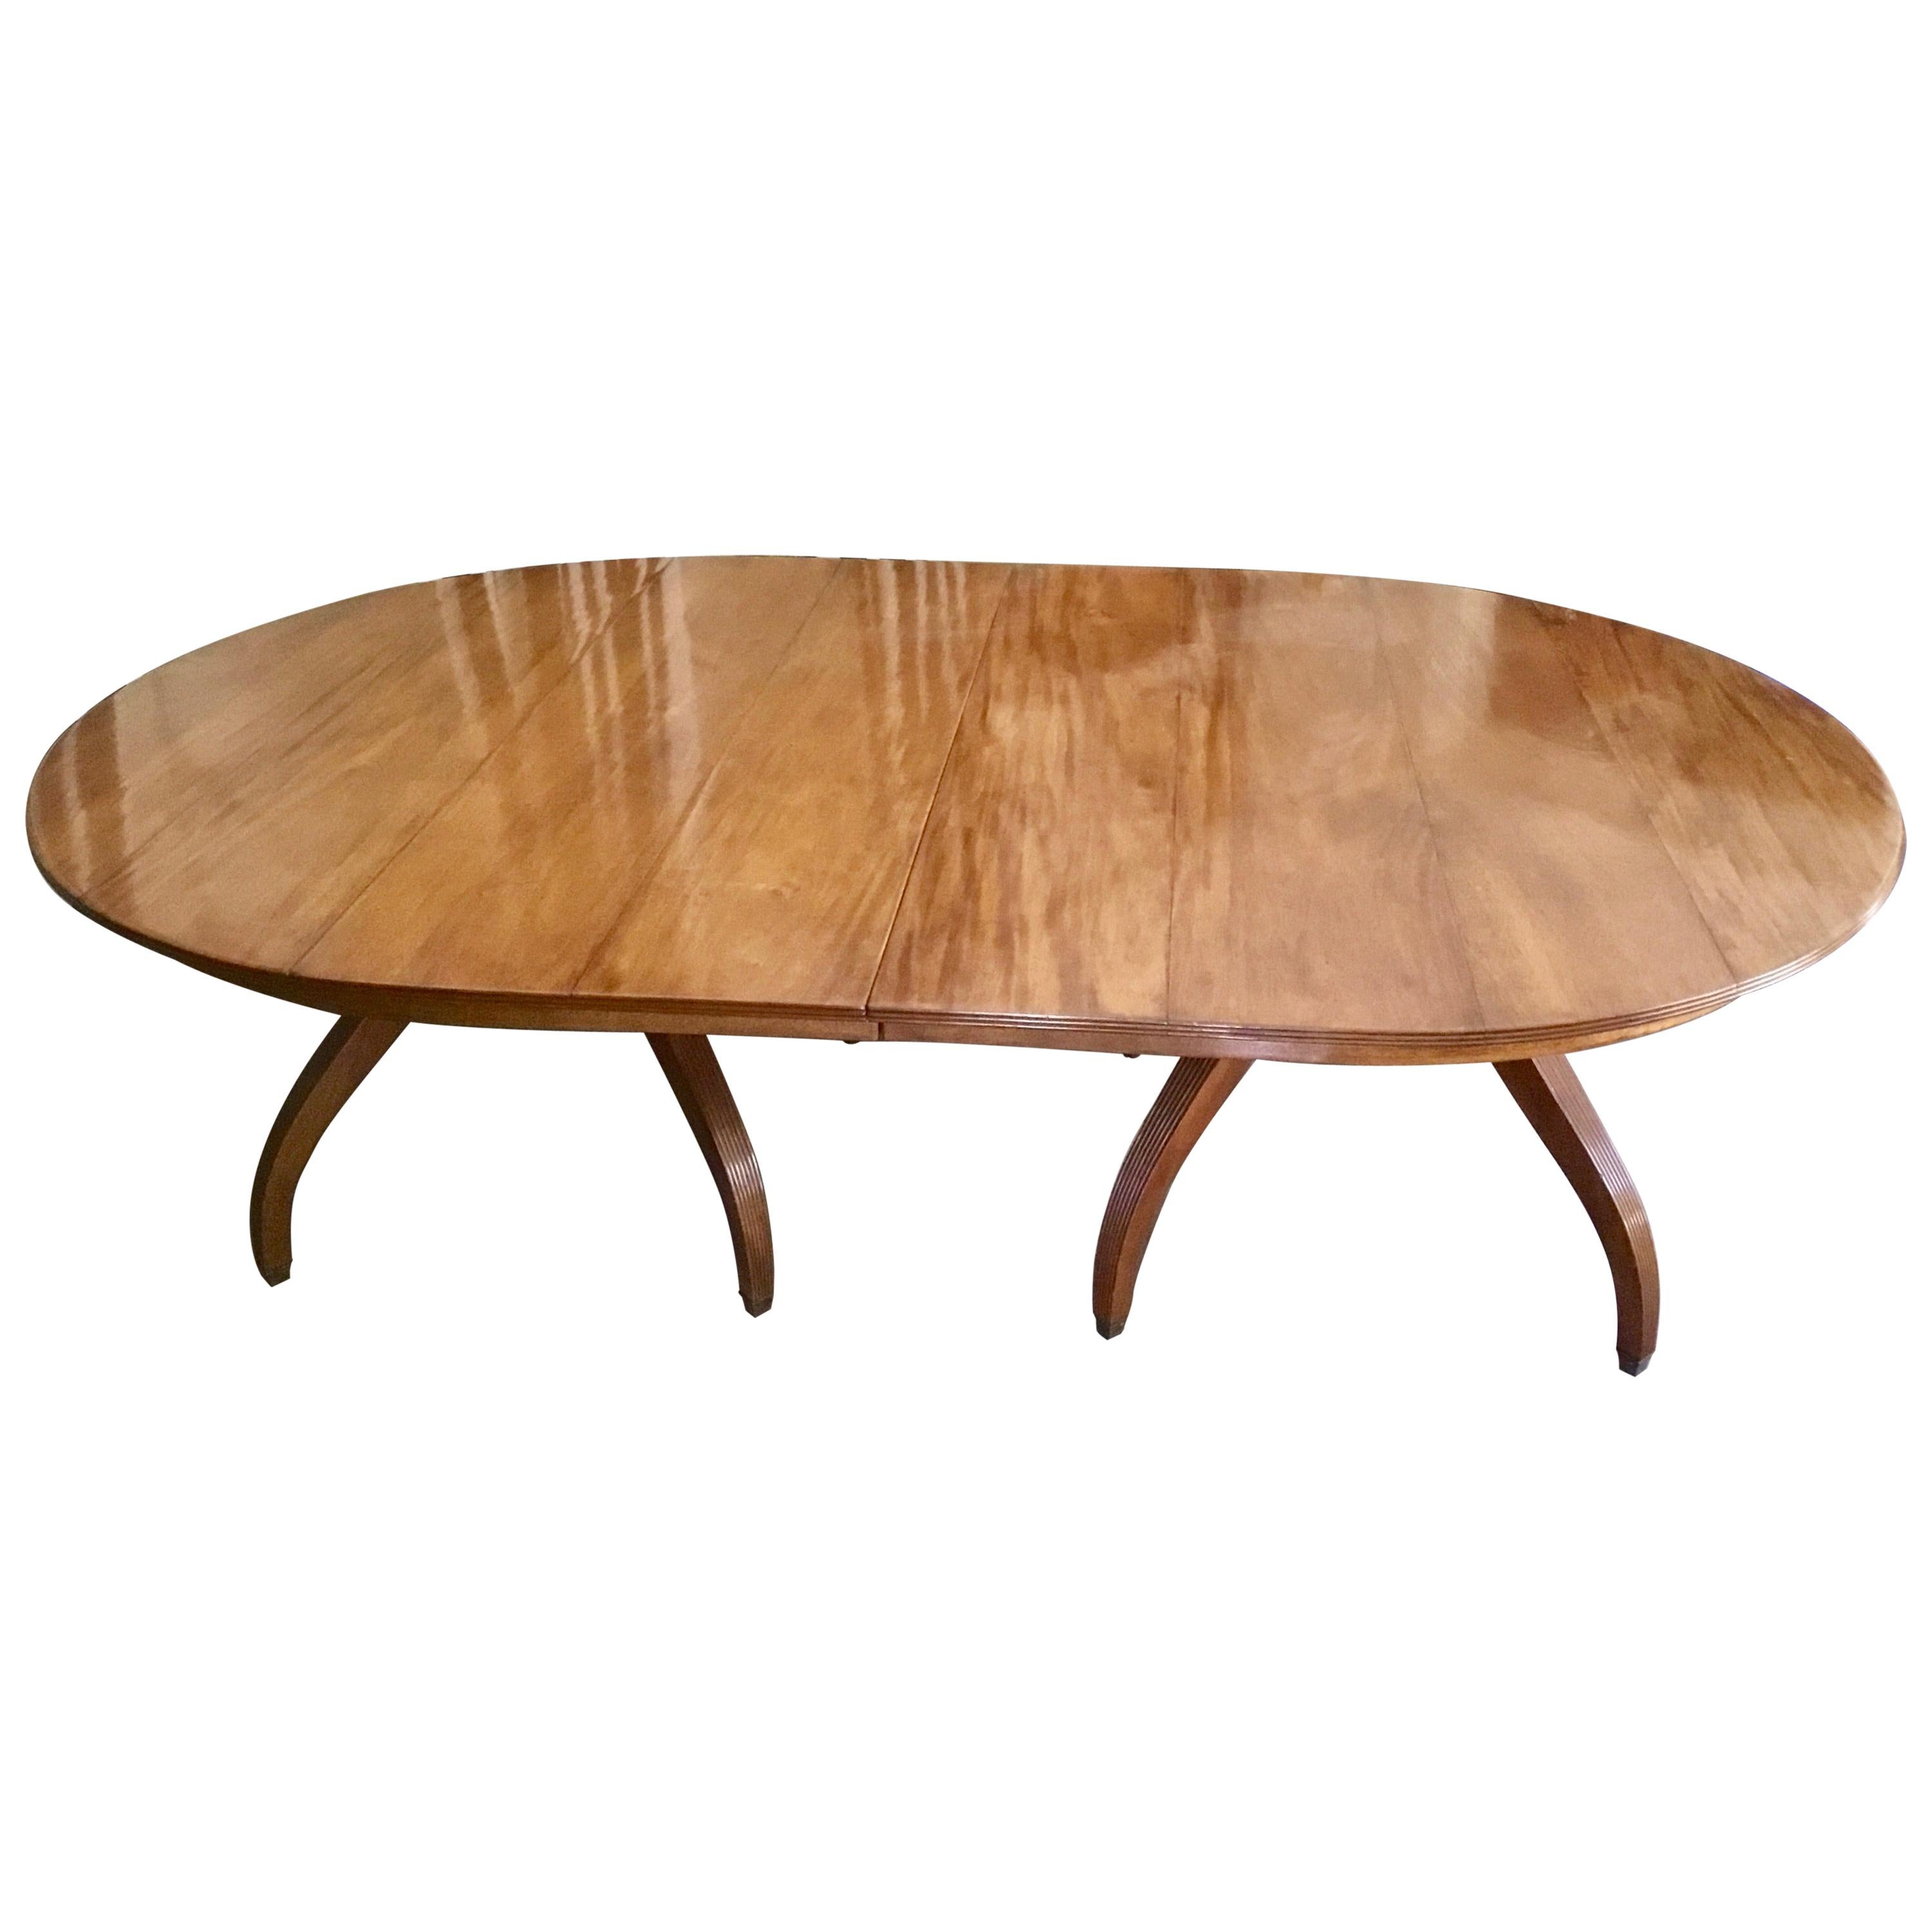 Rose Tarlow Mahogany Regency Dining Table Expands 10 122 inches